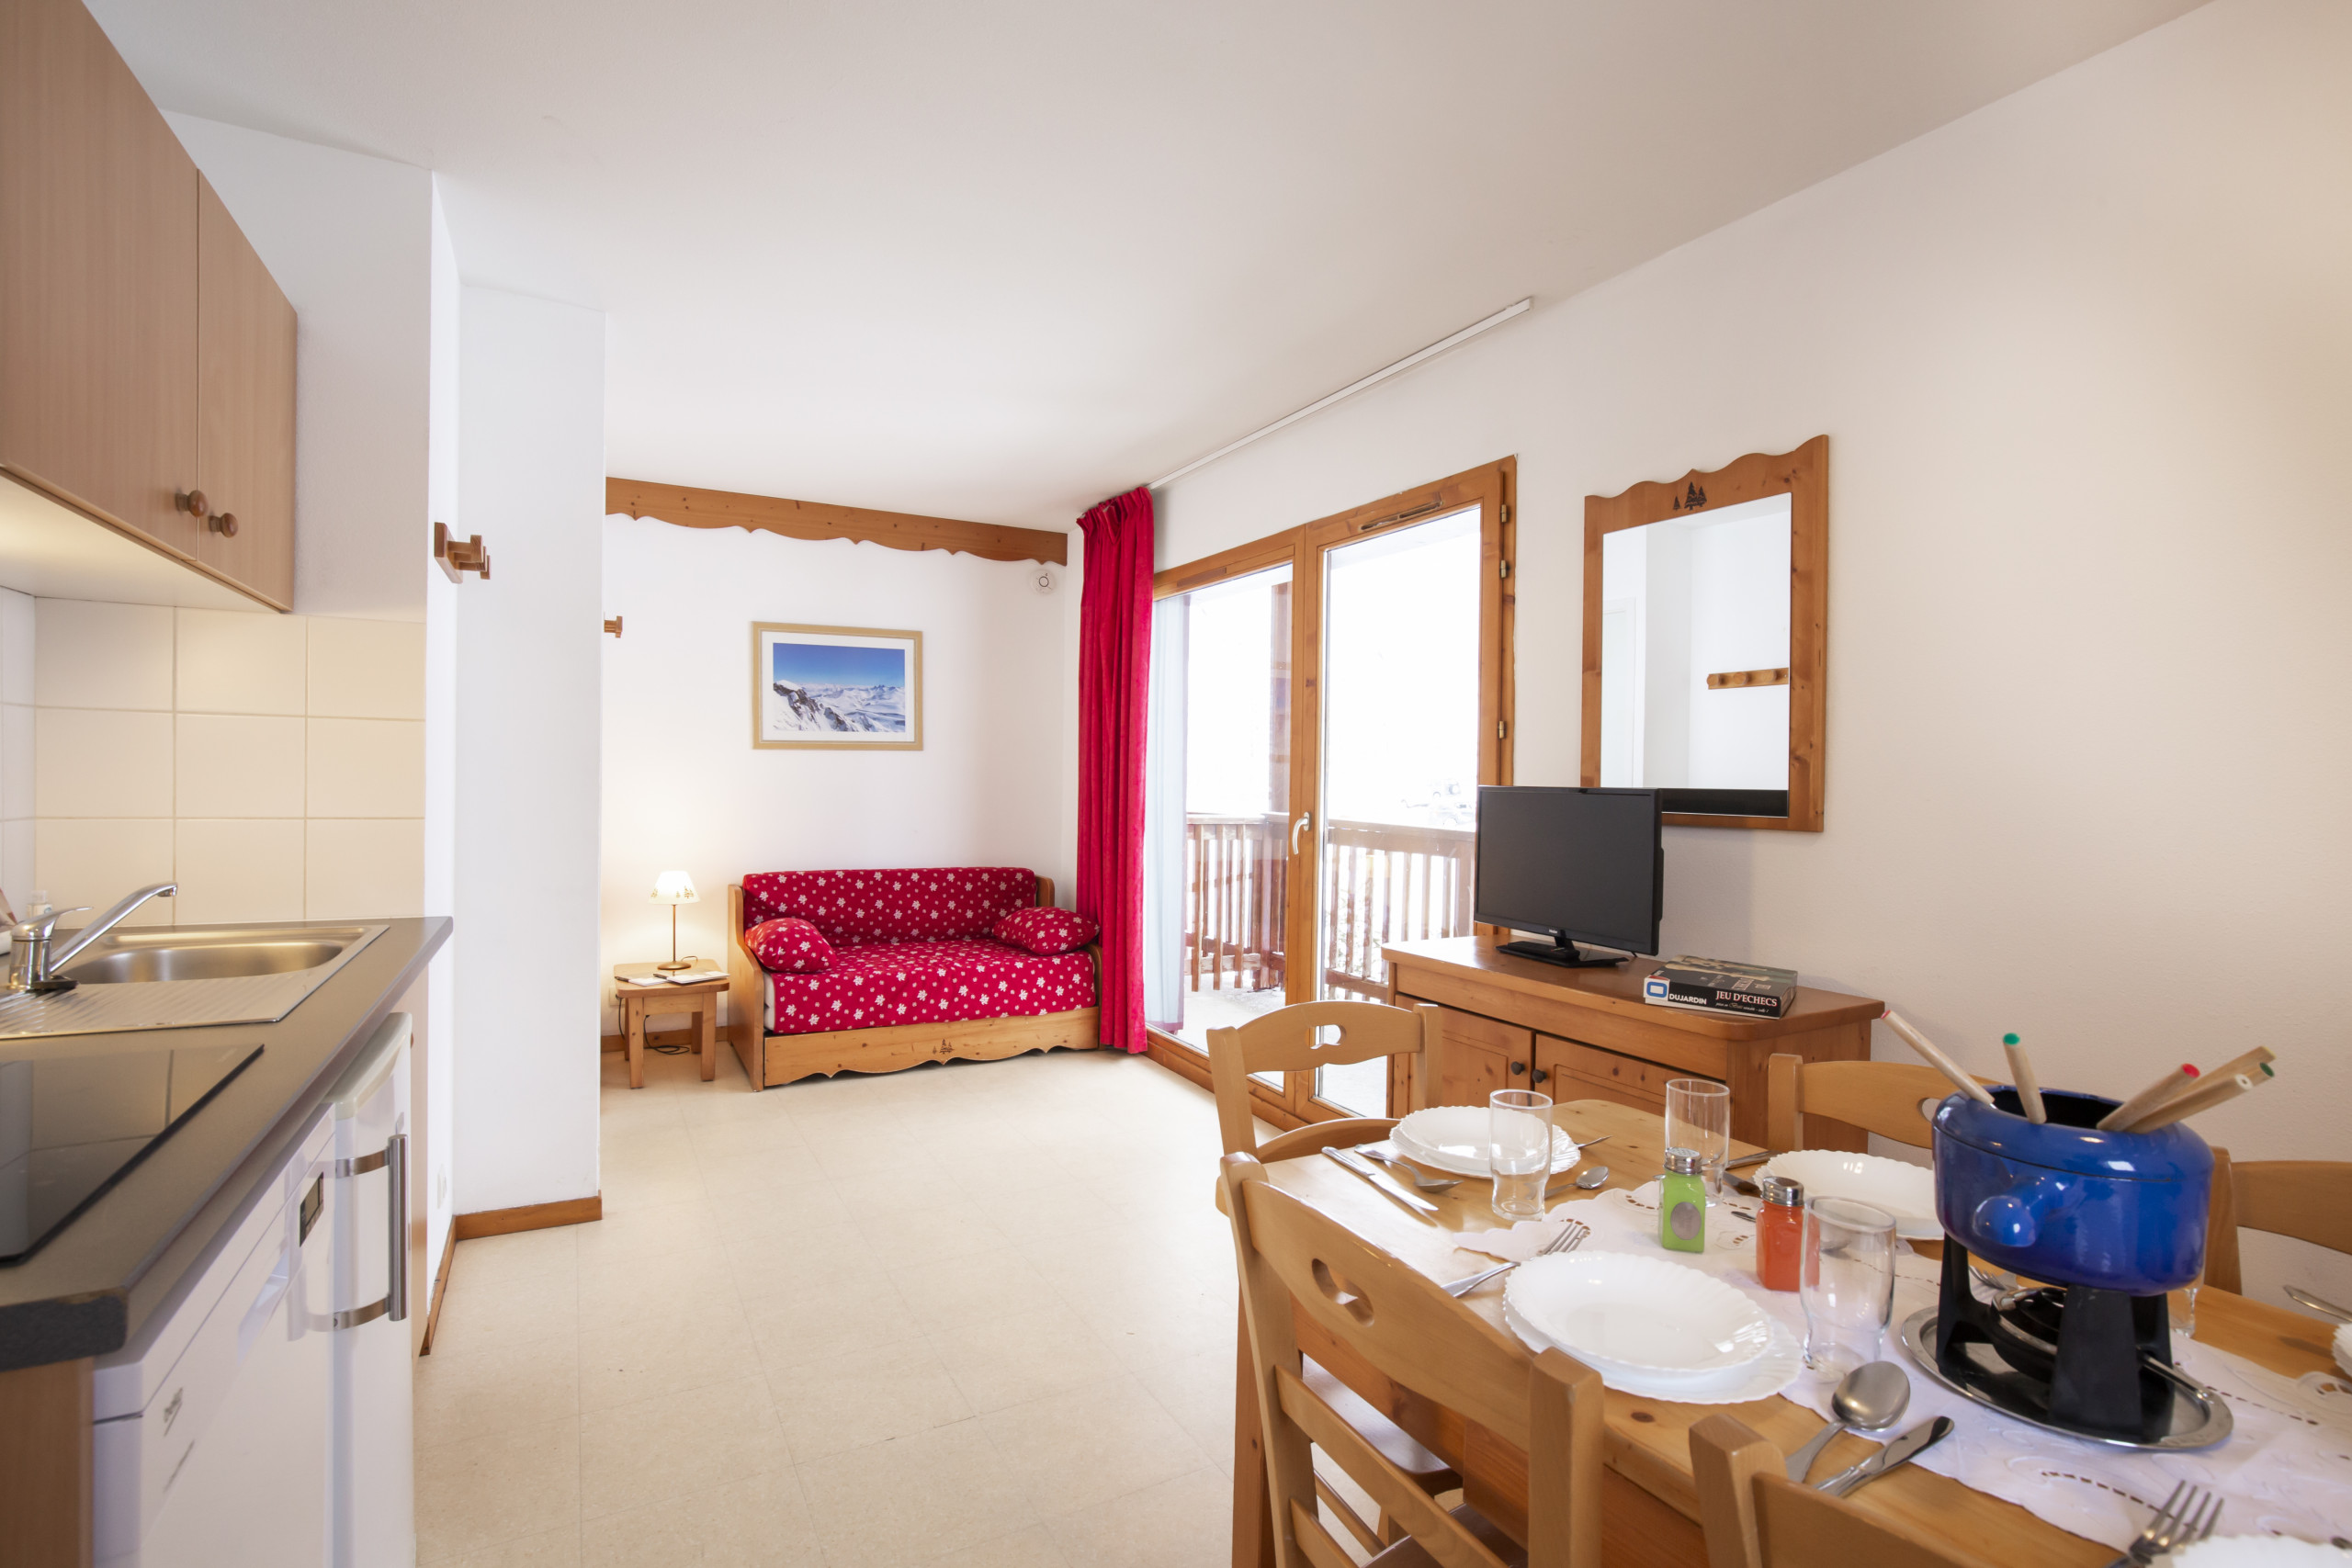 2 rooms 6 persons mountain view and view of the ski slopes - Apartements Balcons C 023 - PARC NAT. VANOISE appart. 6 pers. - Val Cenis Termignon